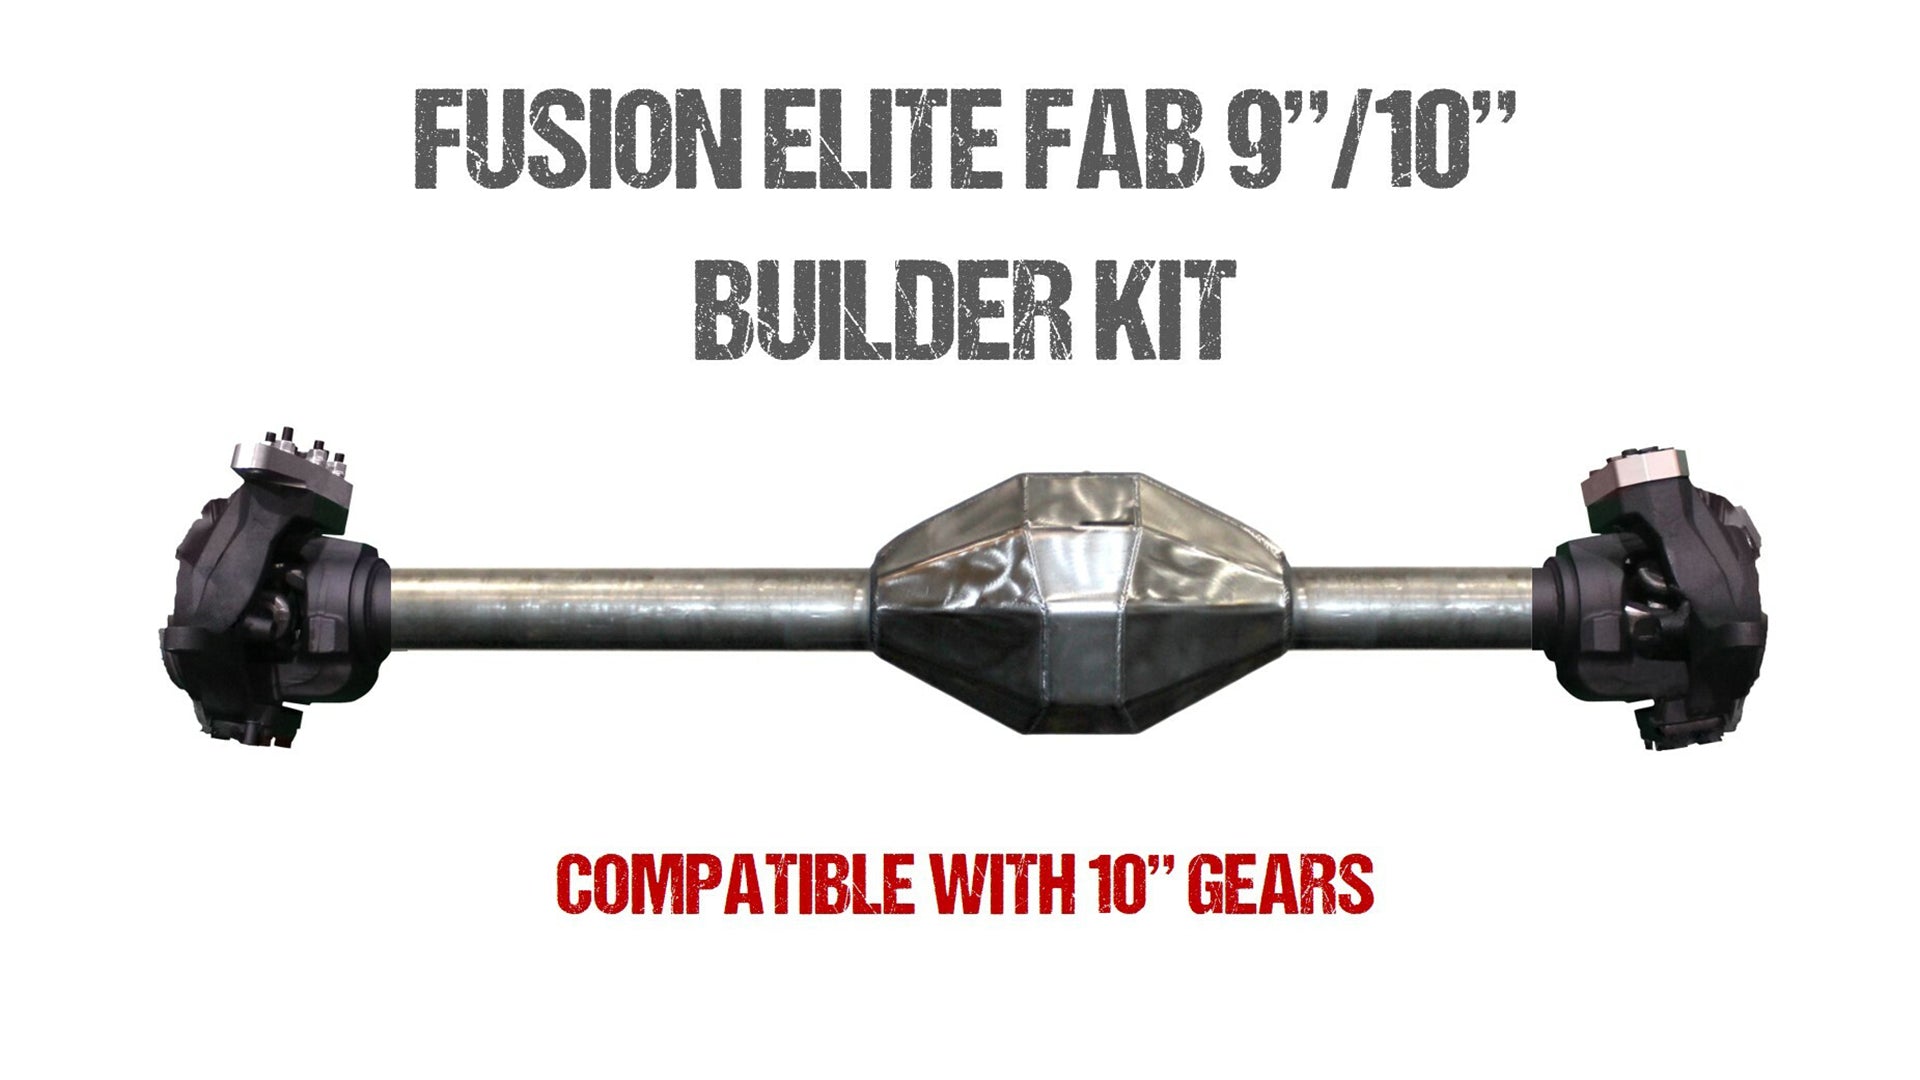 Fusion Elite Series Fabricated 9"/10" Front Builder Kit - fusion4x4